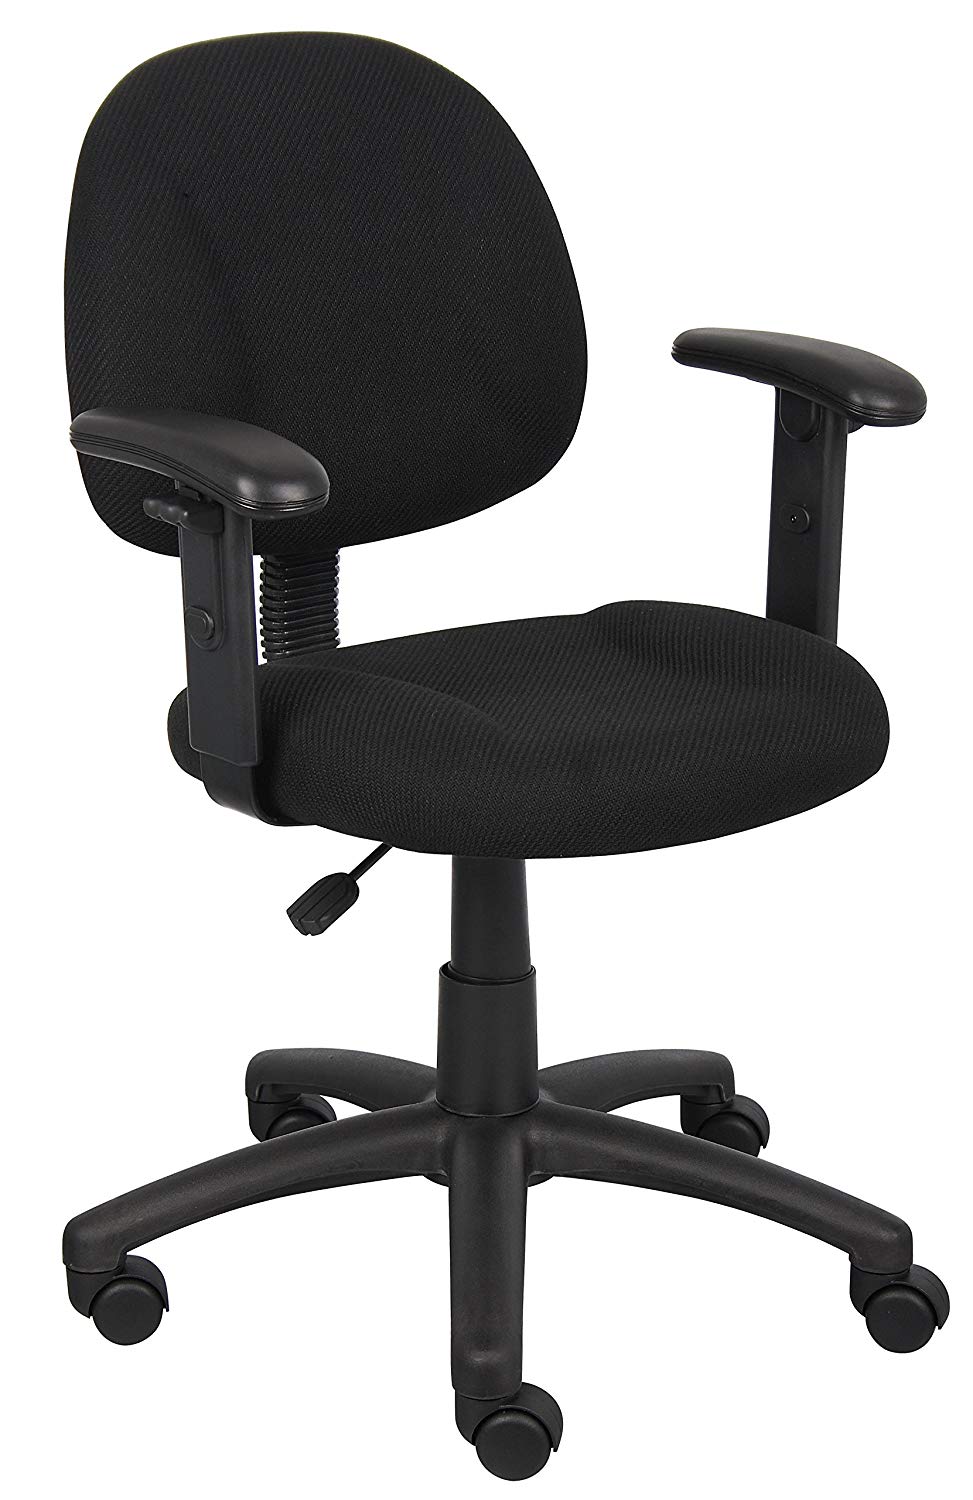 Best Budget Office Chair 2021 Take A Look At Our Buying Guide